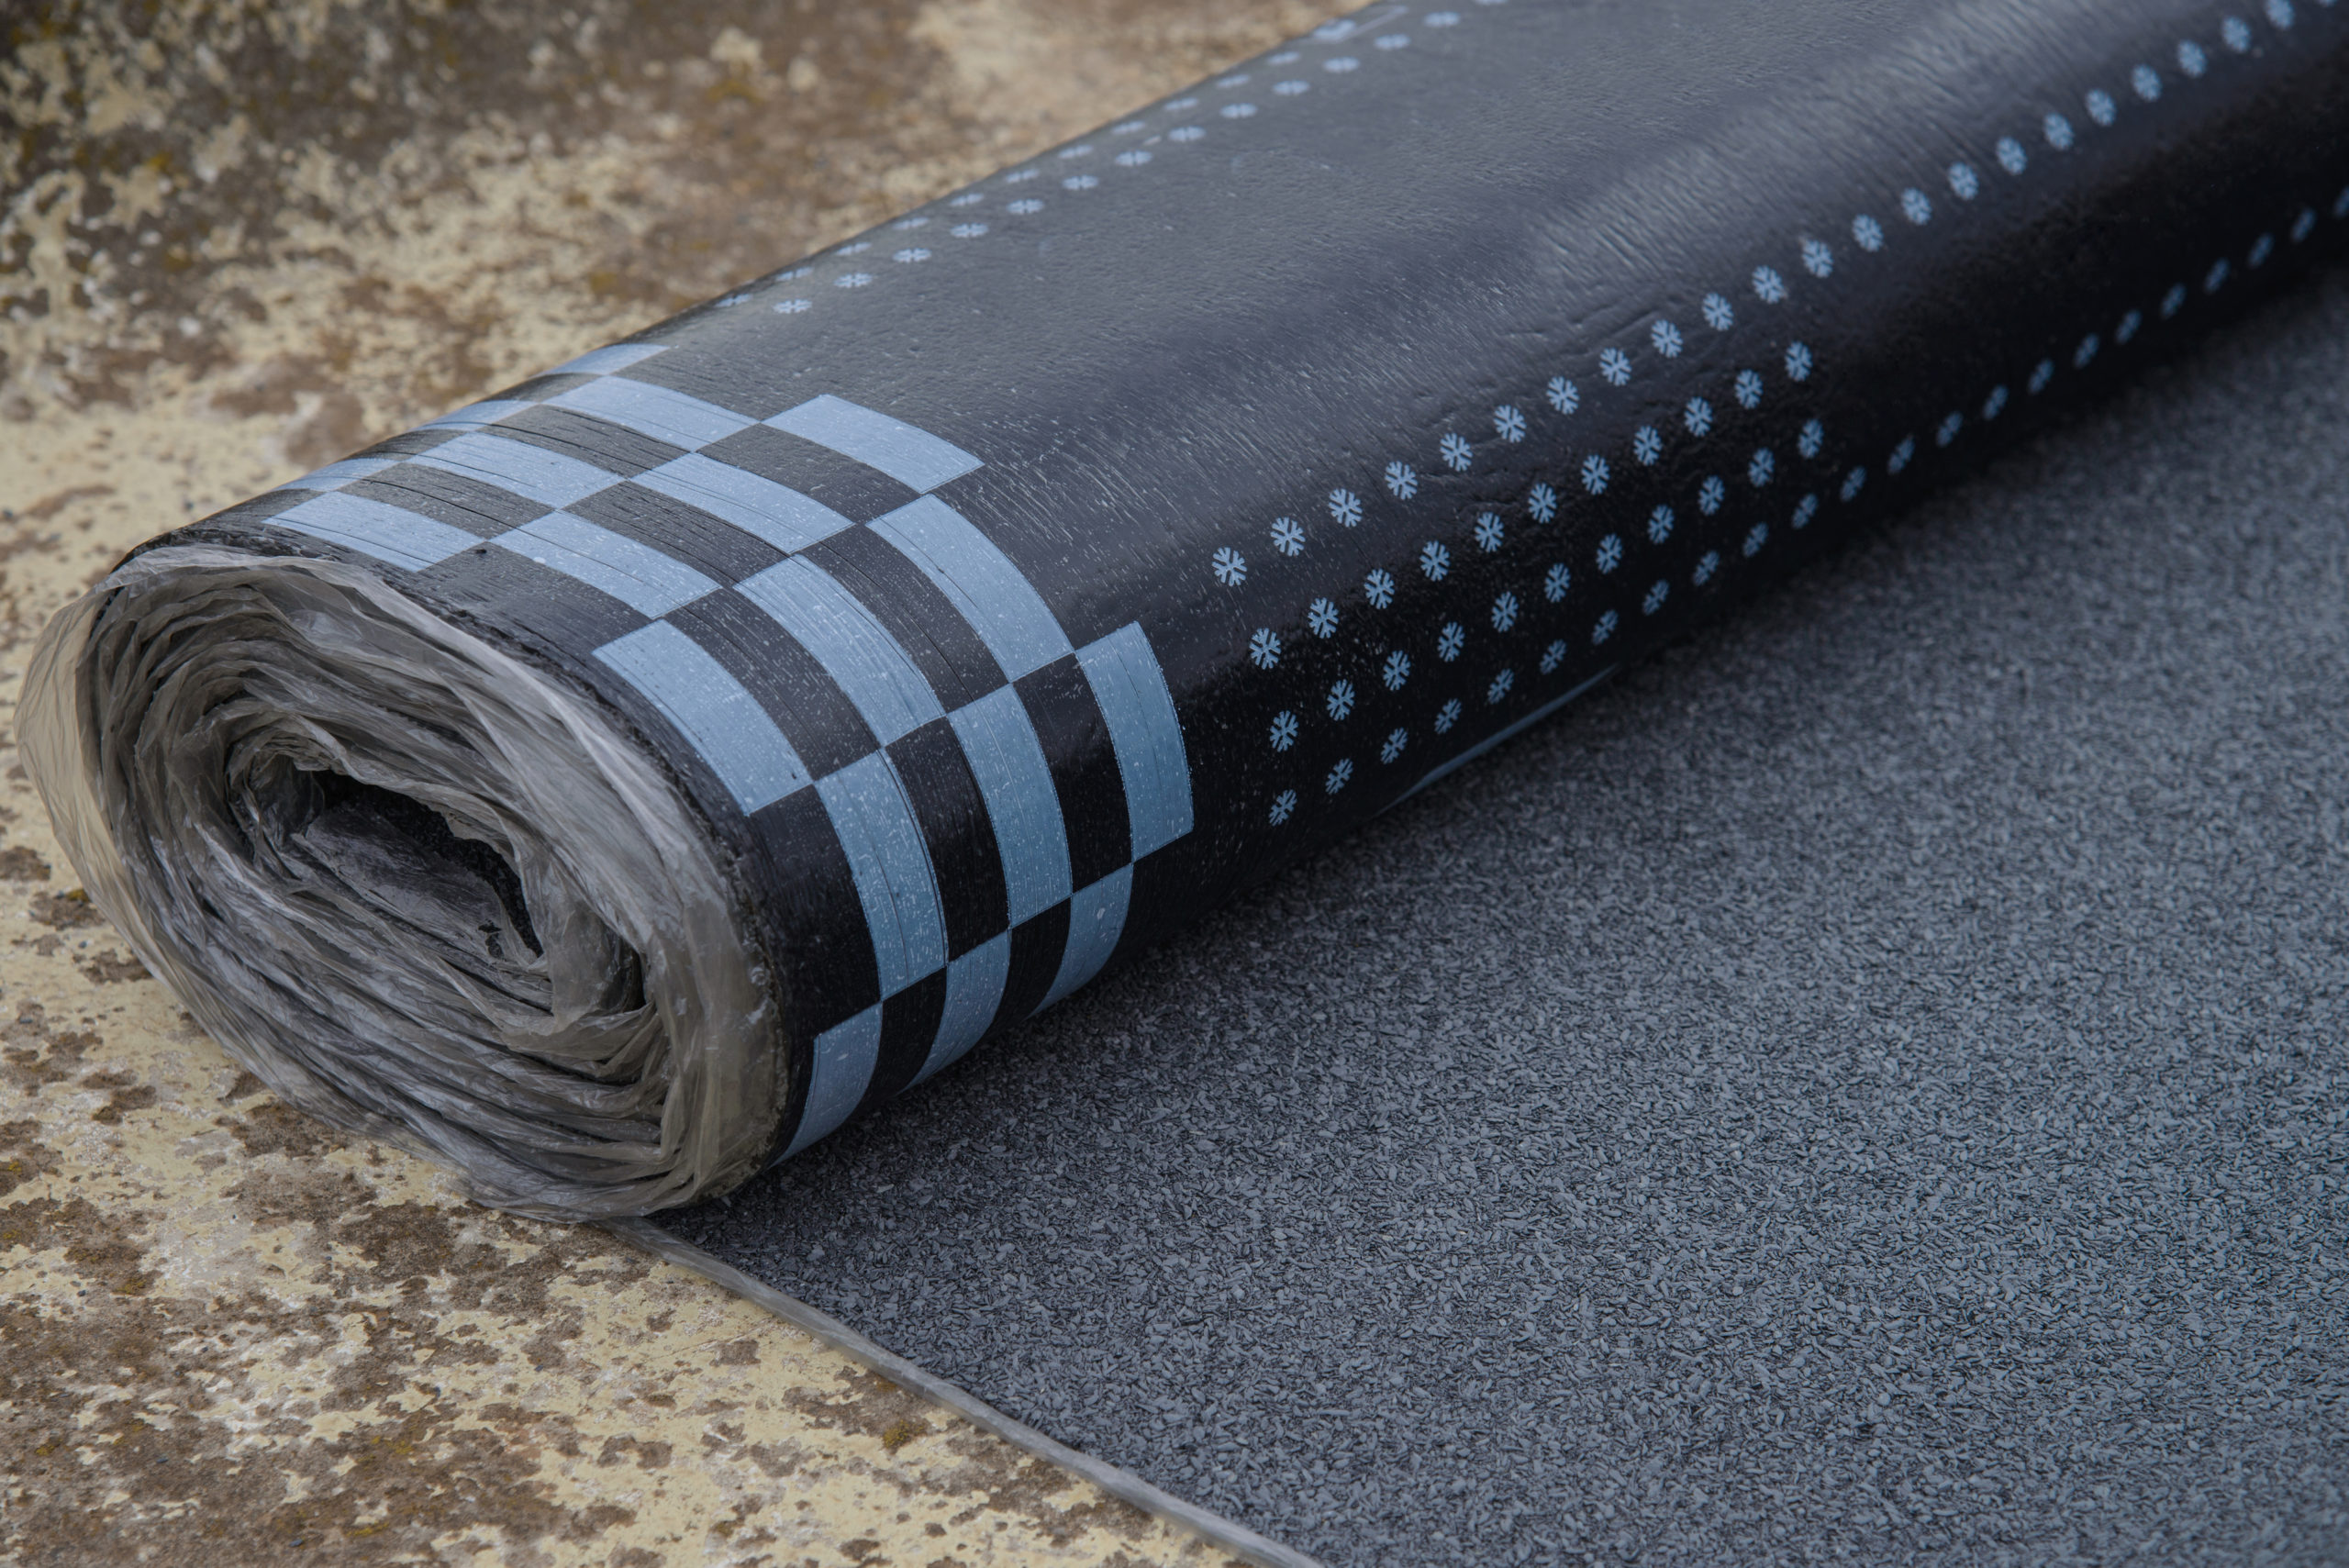 A bitumen waterproofing membrane rests partially unrolled on the ground.